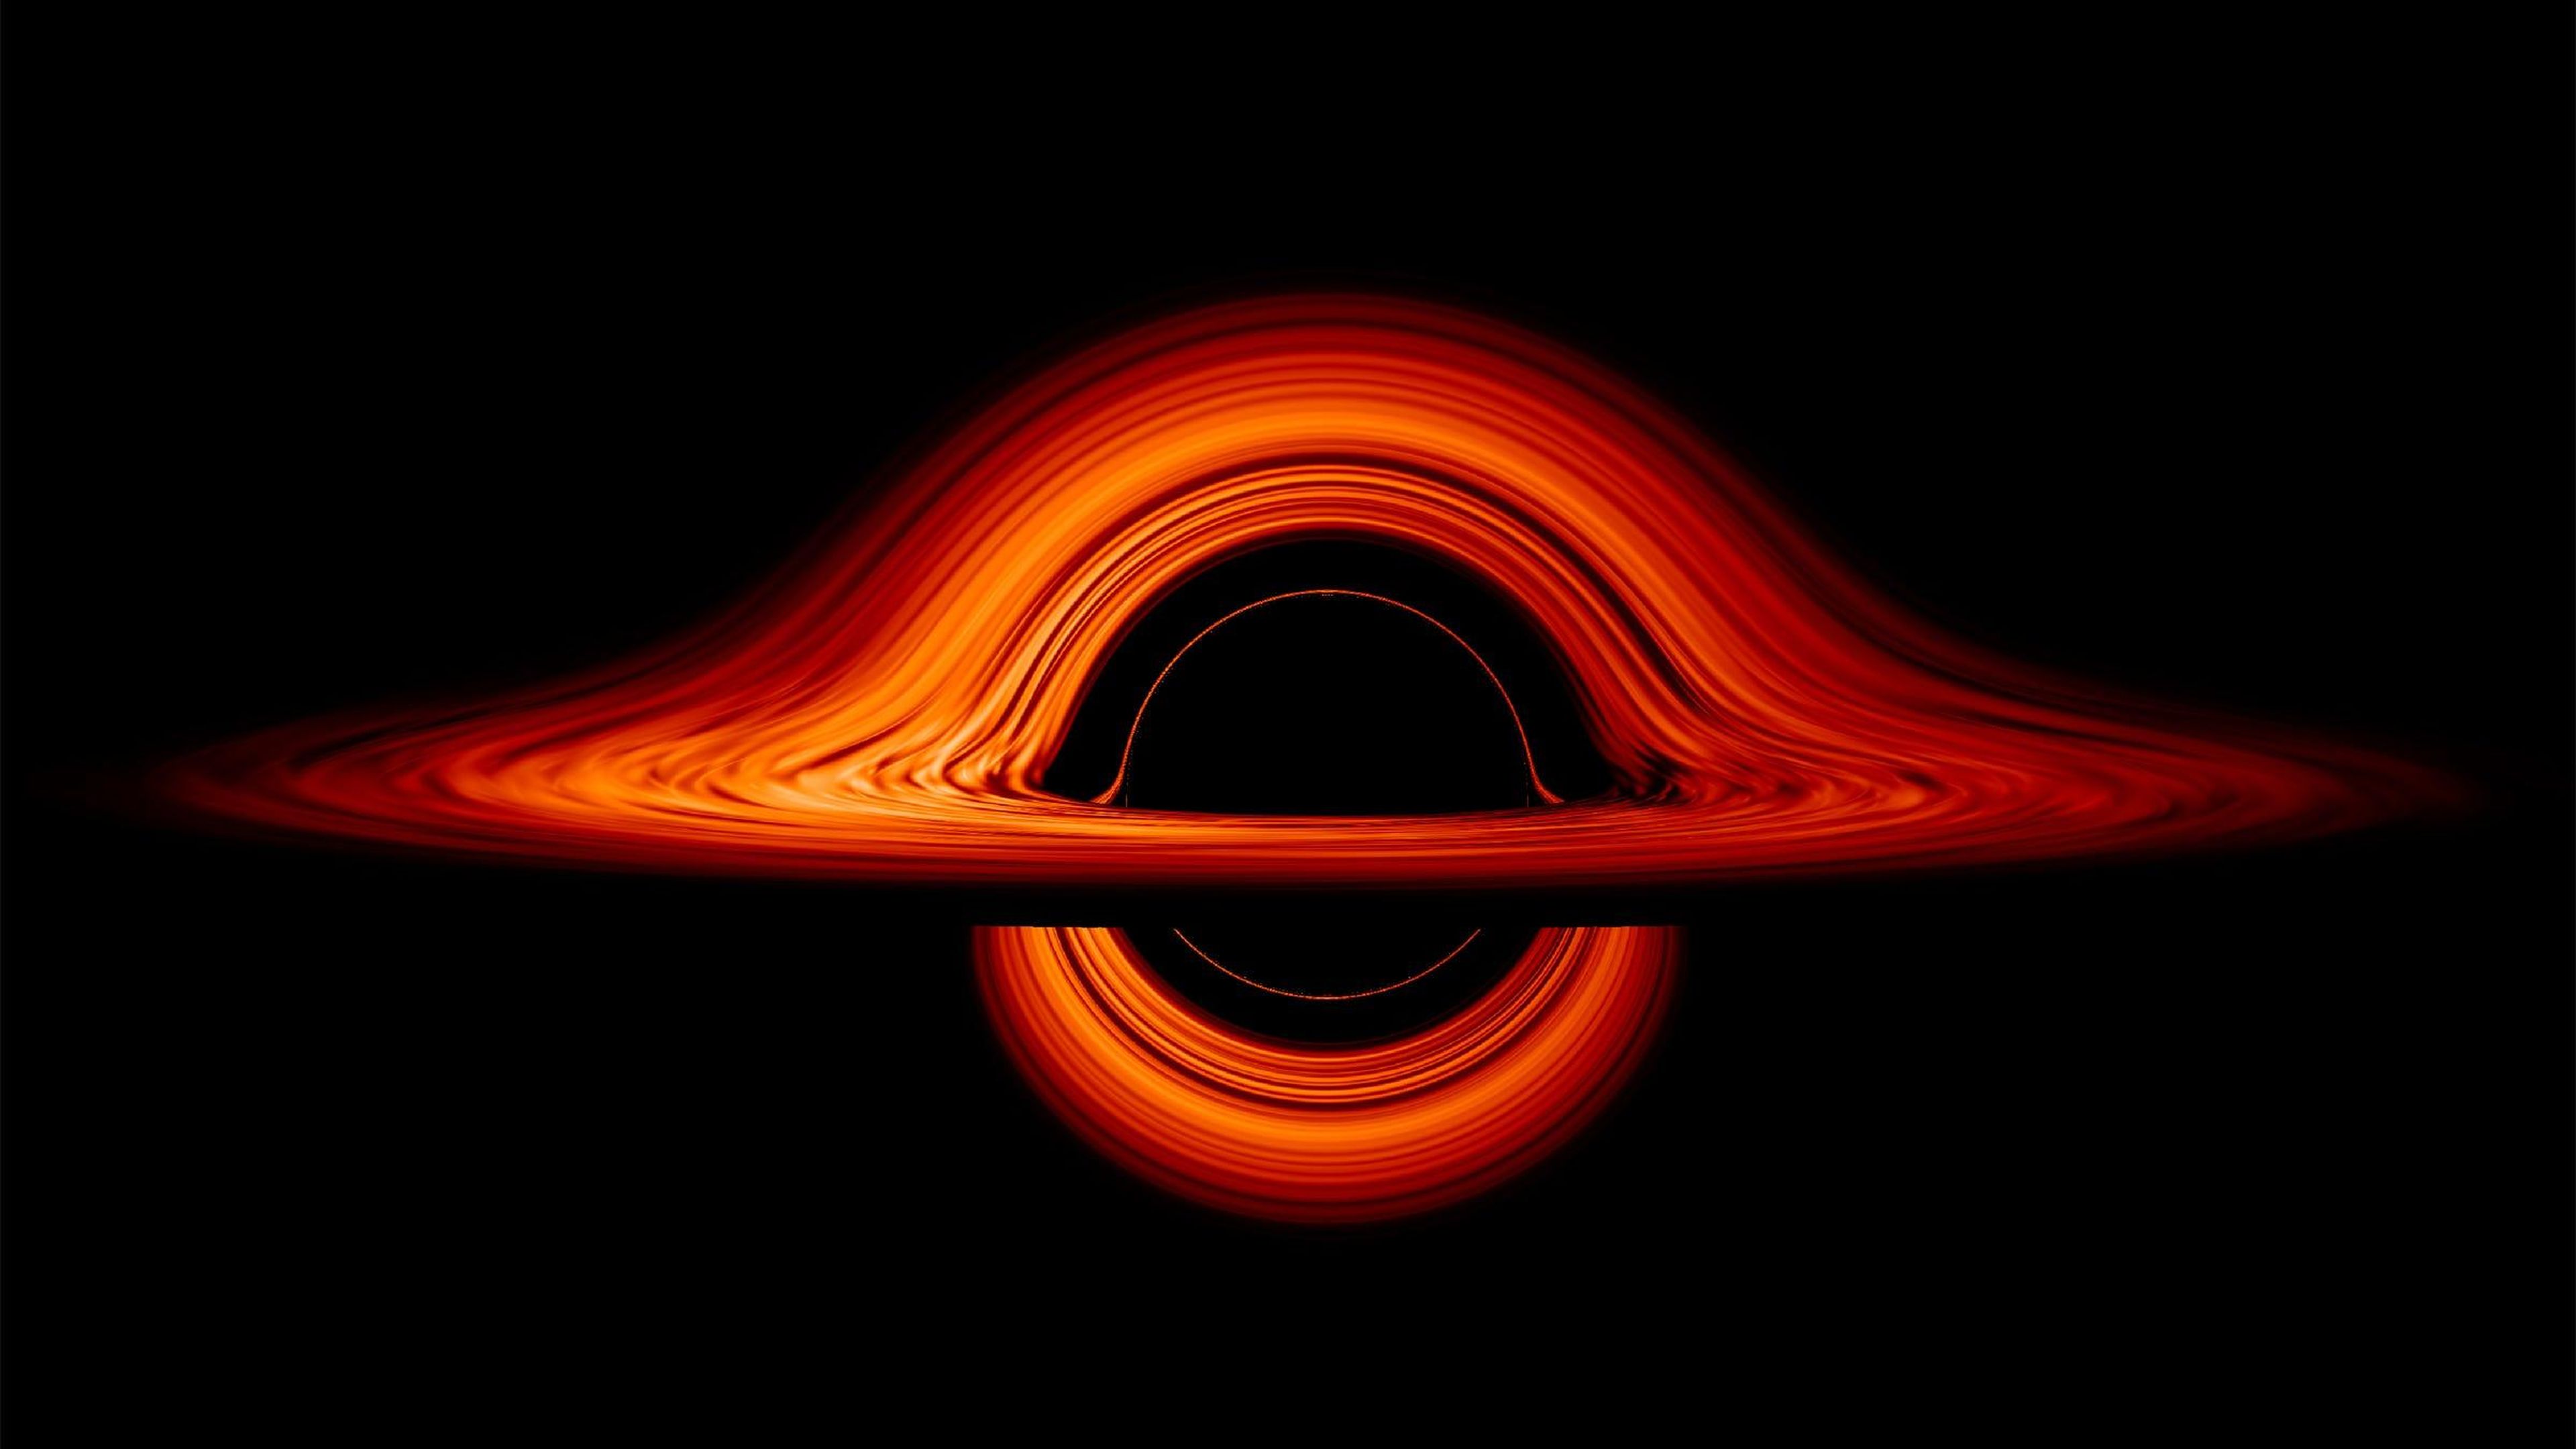 An animation of a black hole as viewed from the side.